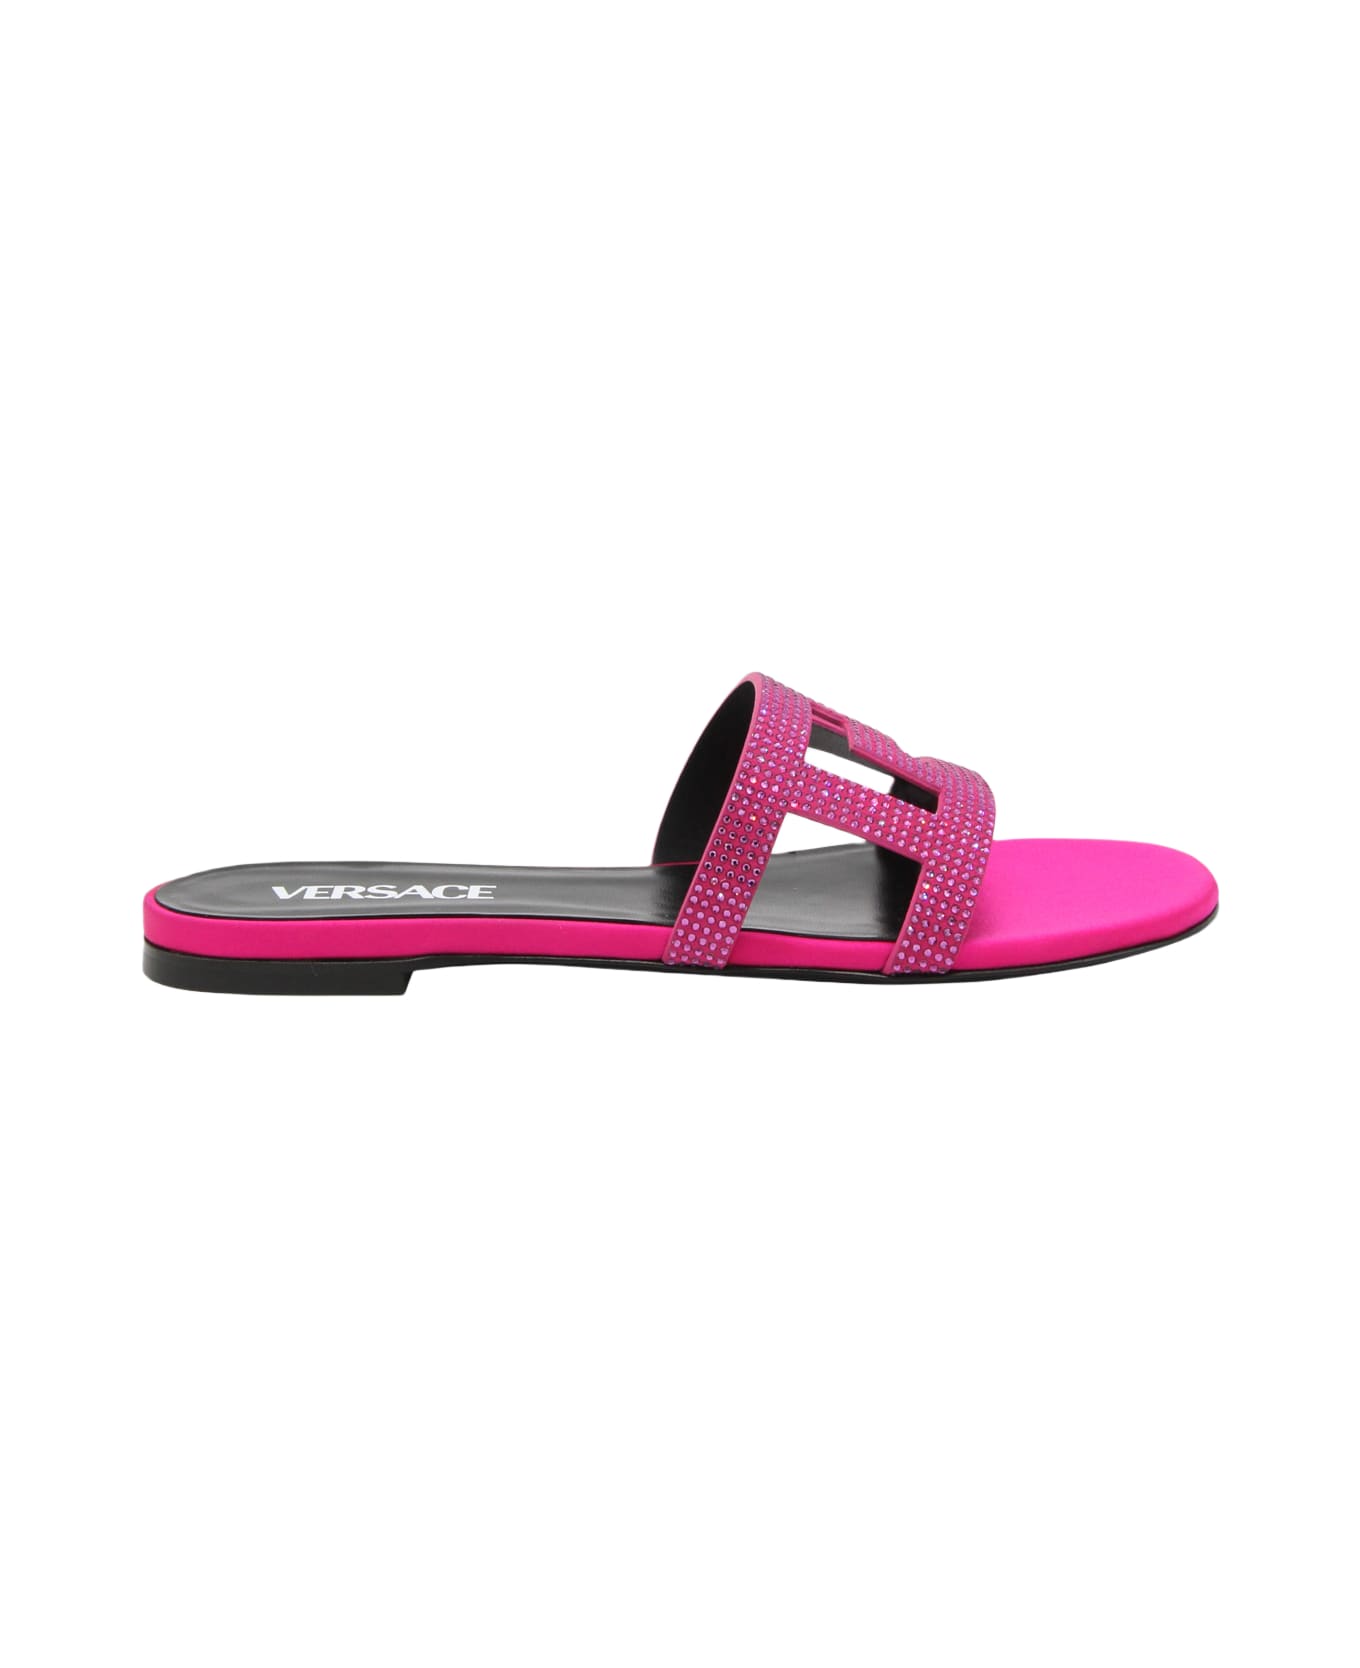 Versace Pink Leather Greca Maze Sandals - GLOSSY PINK-ORO VERSACE